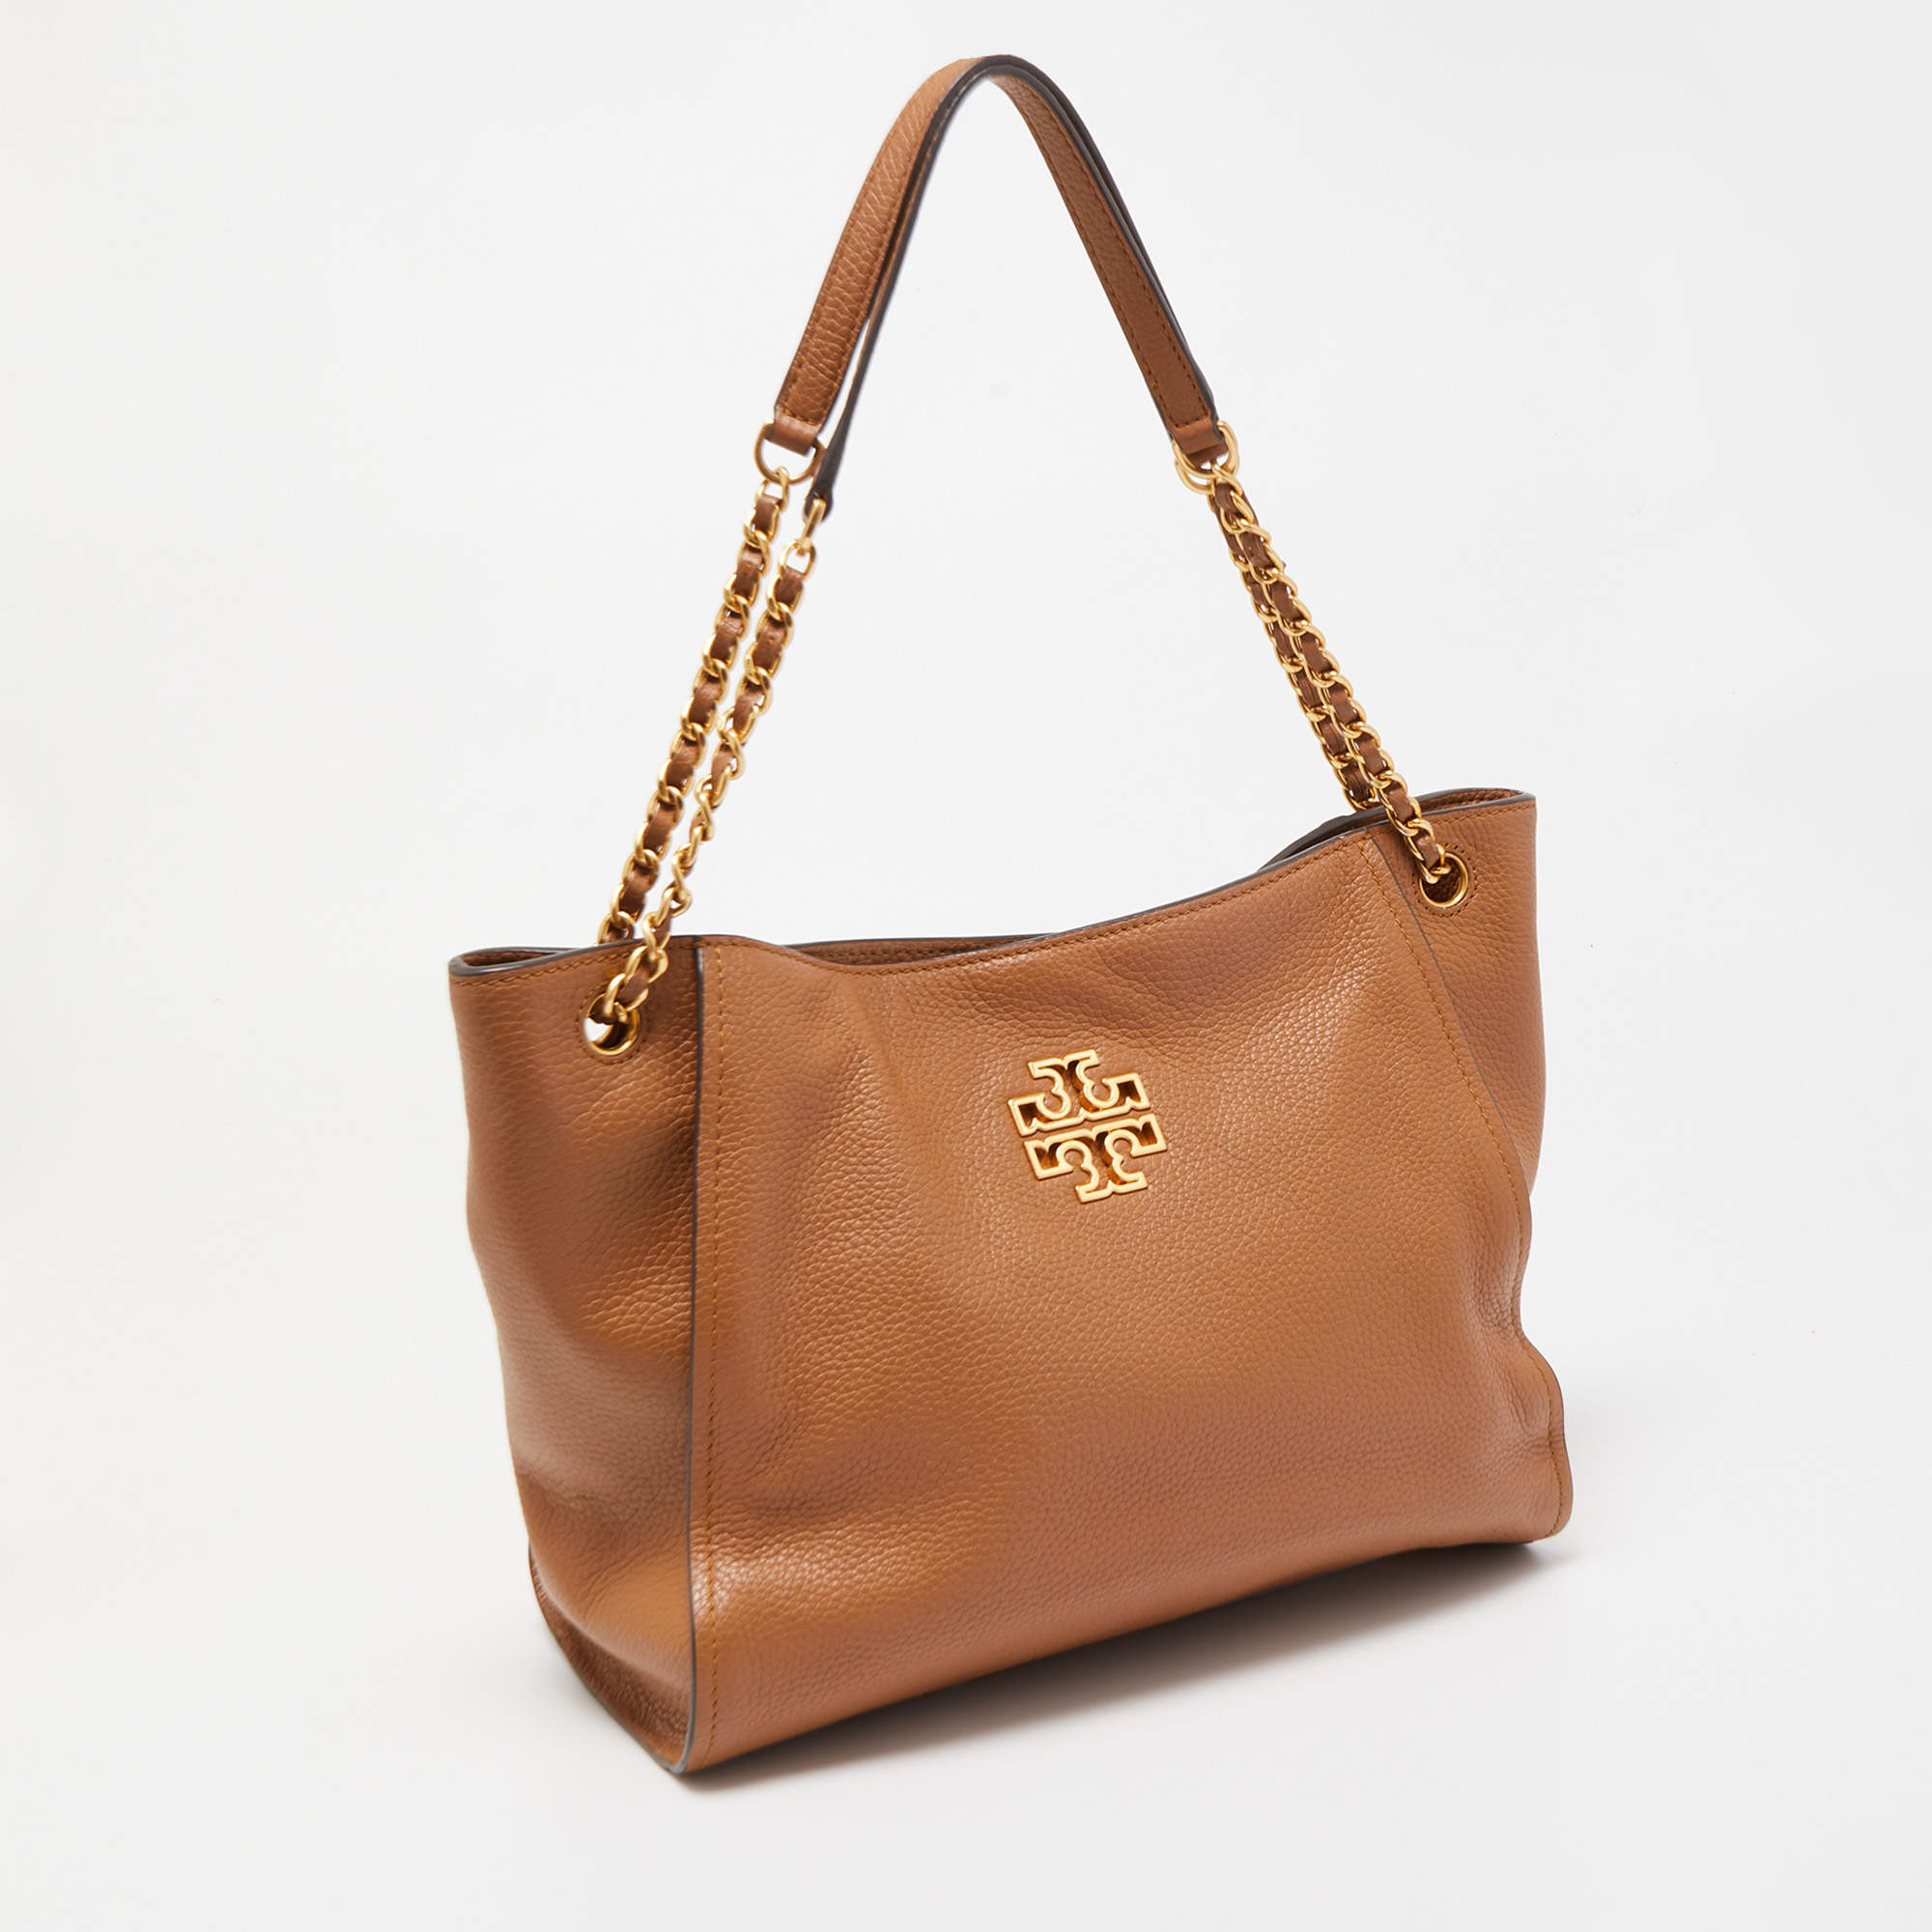 Authentic Cartier Burberry and Tory Burch Shopping Bags -  Israel